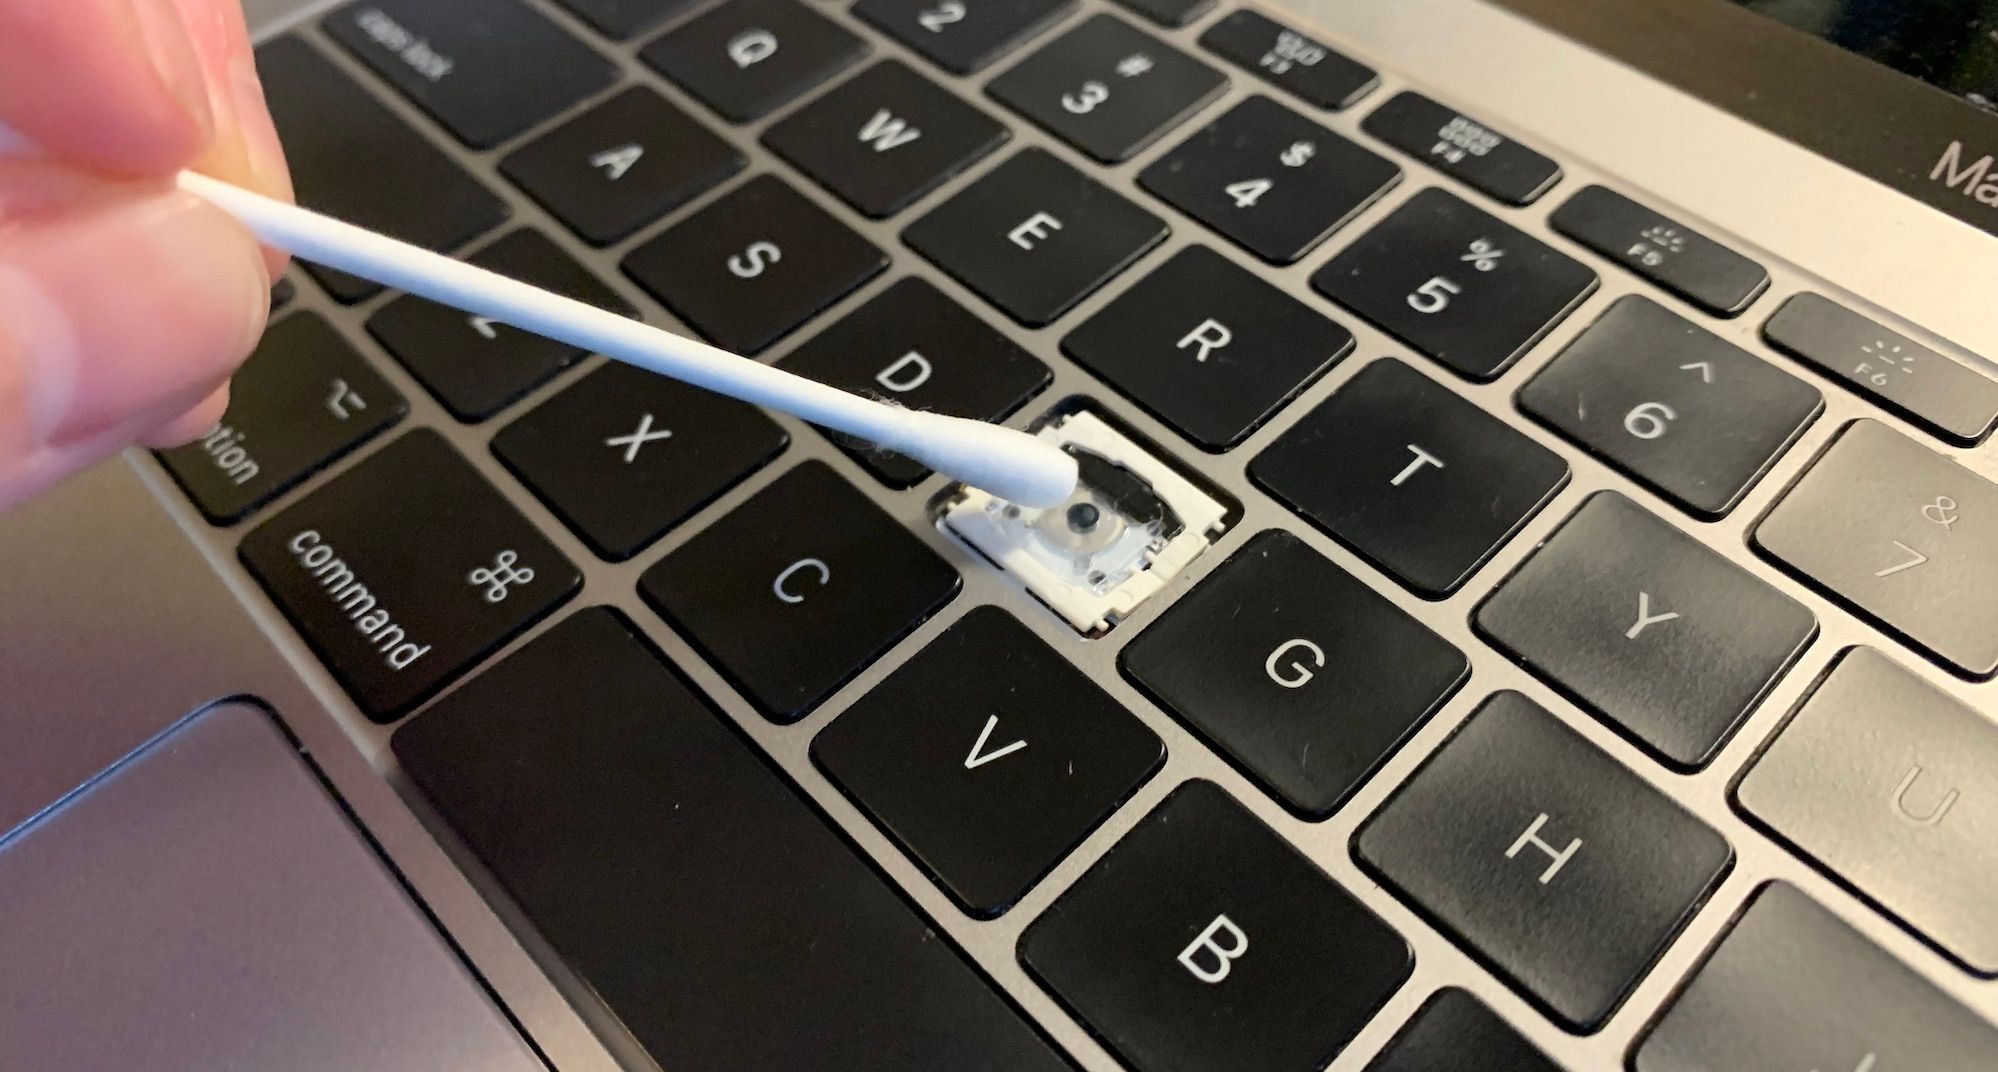 A hand cleaning undeneath where a macbook keycap usually attaches, using a cotton swab